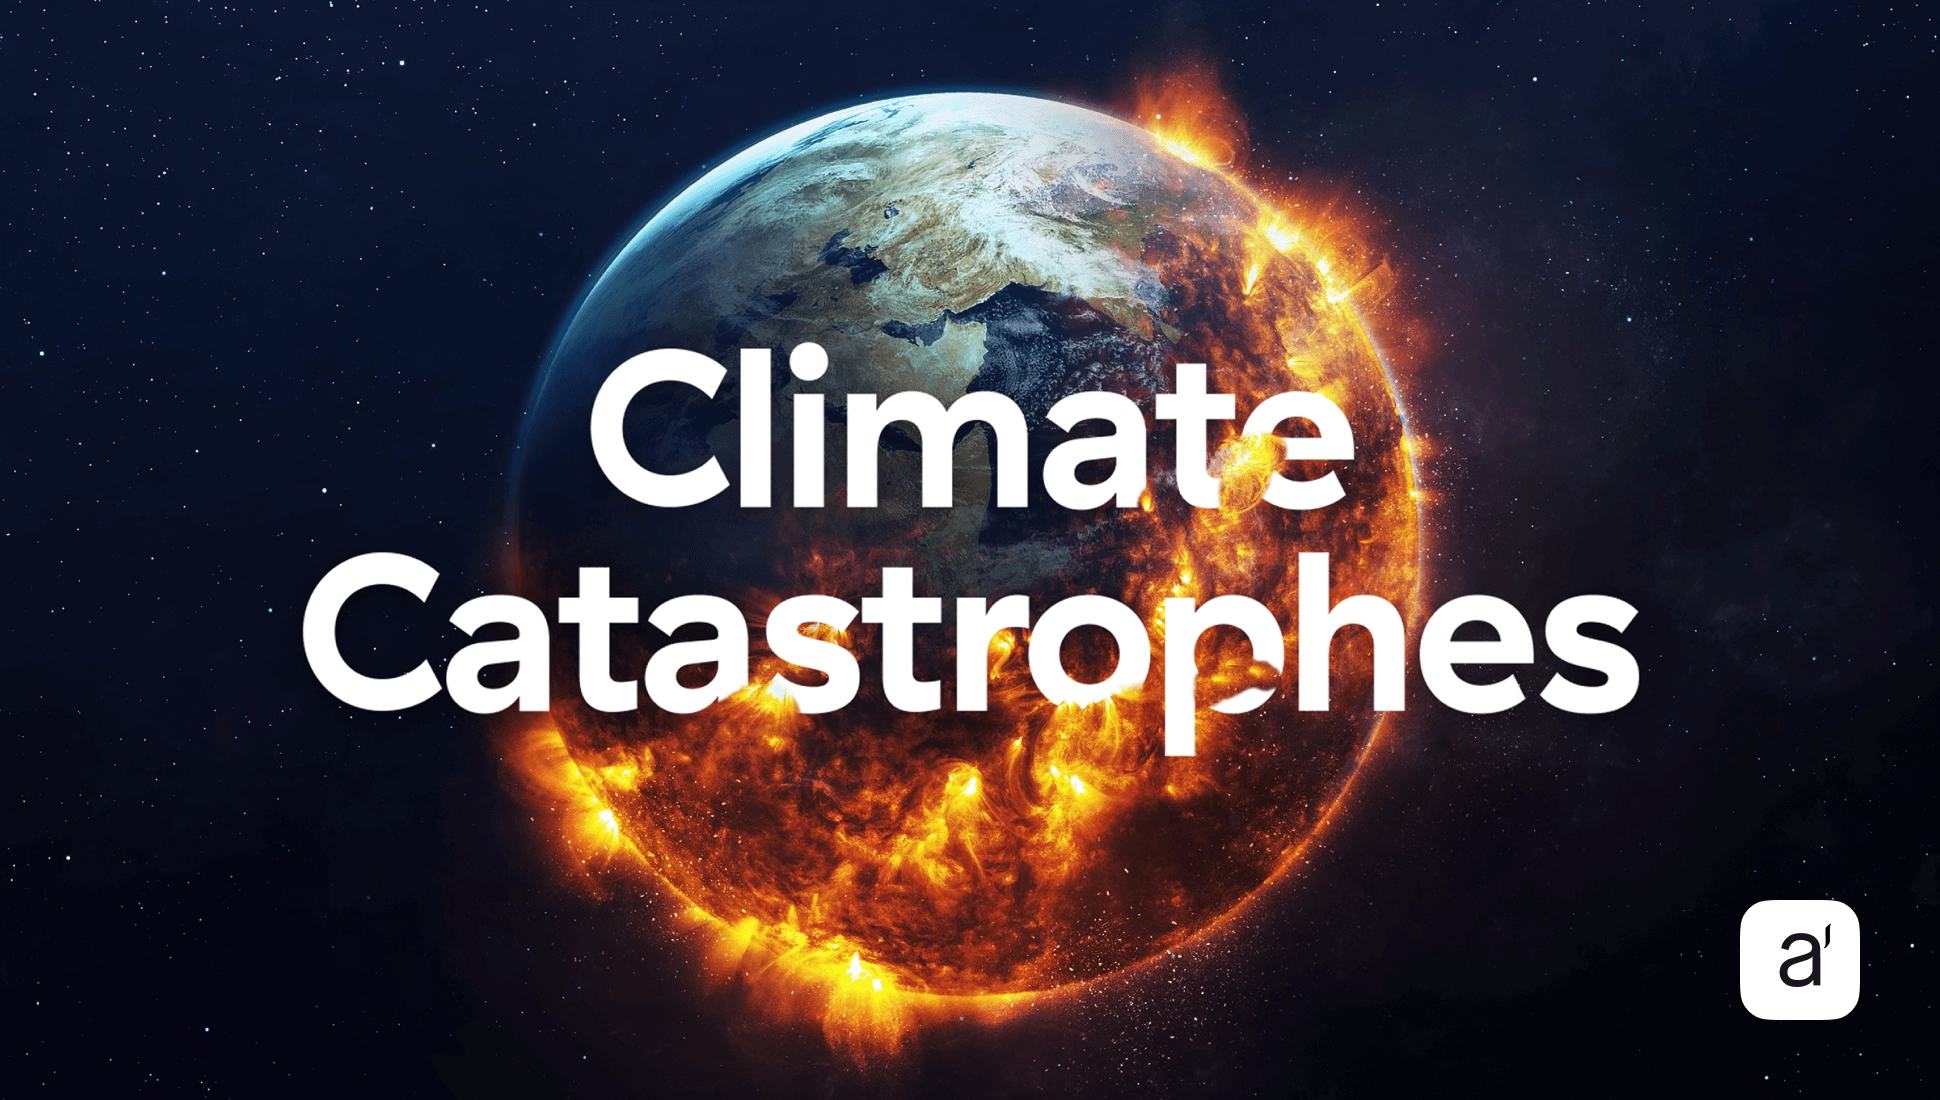 Climate catastrophes: at our doorstep